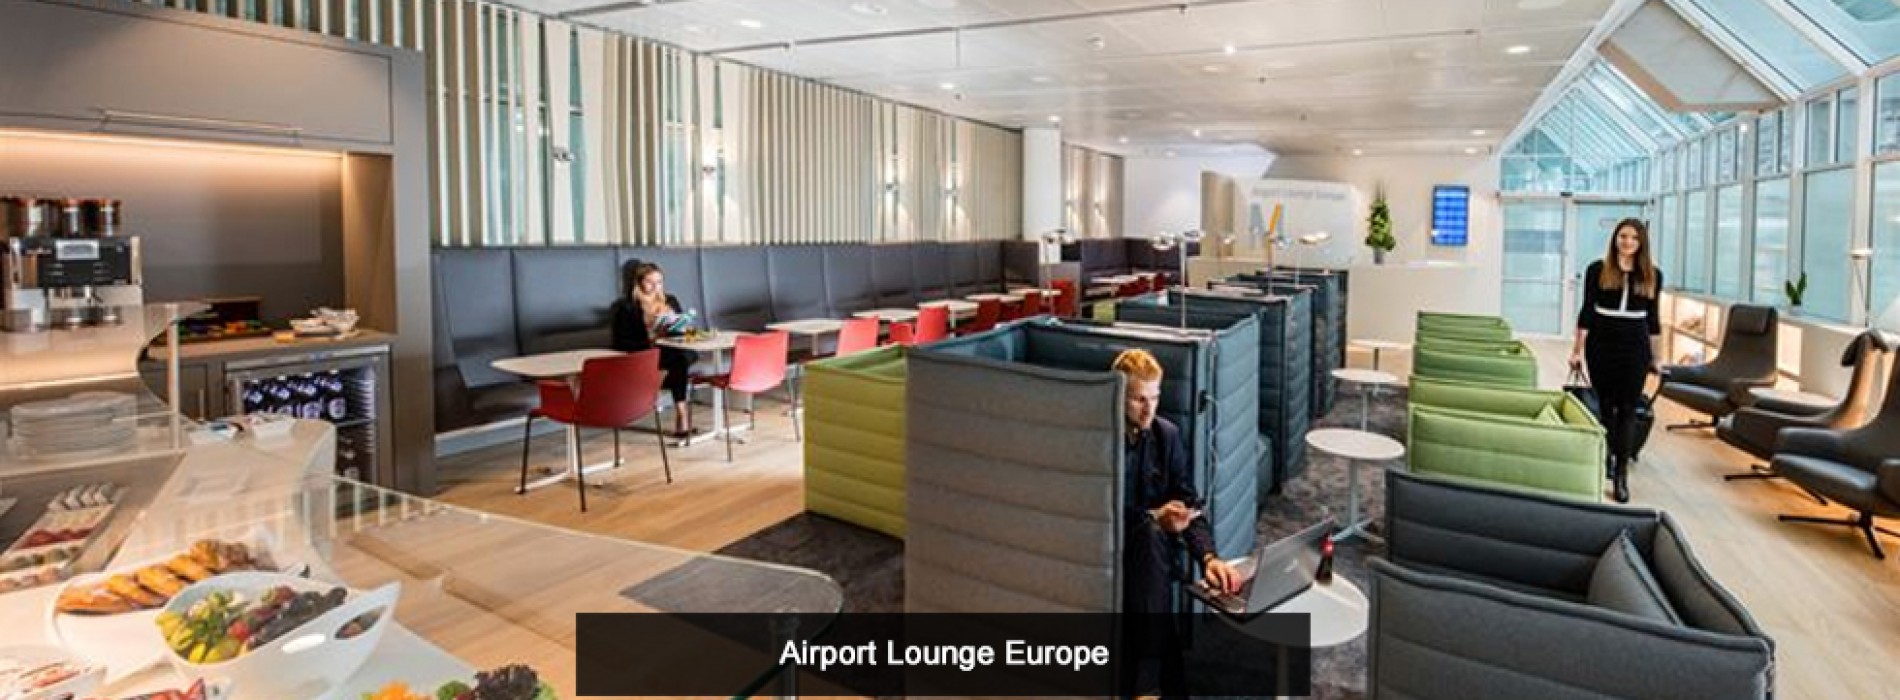 Airport Lounge Europe reopens at Munich Airport